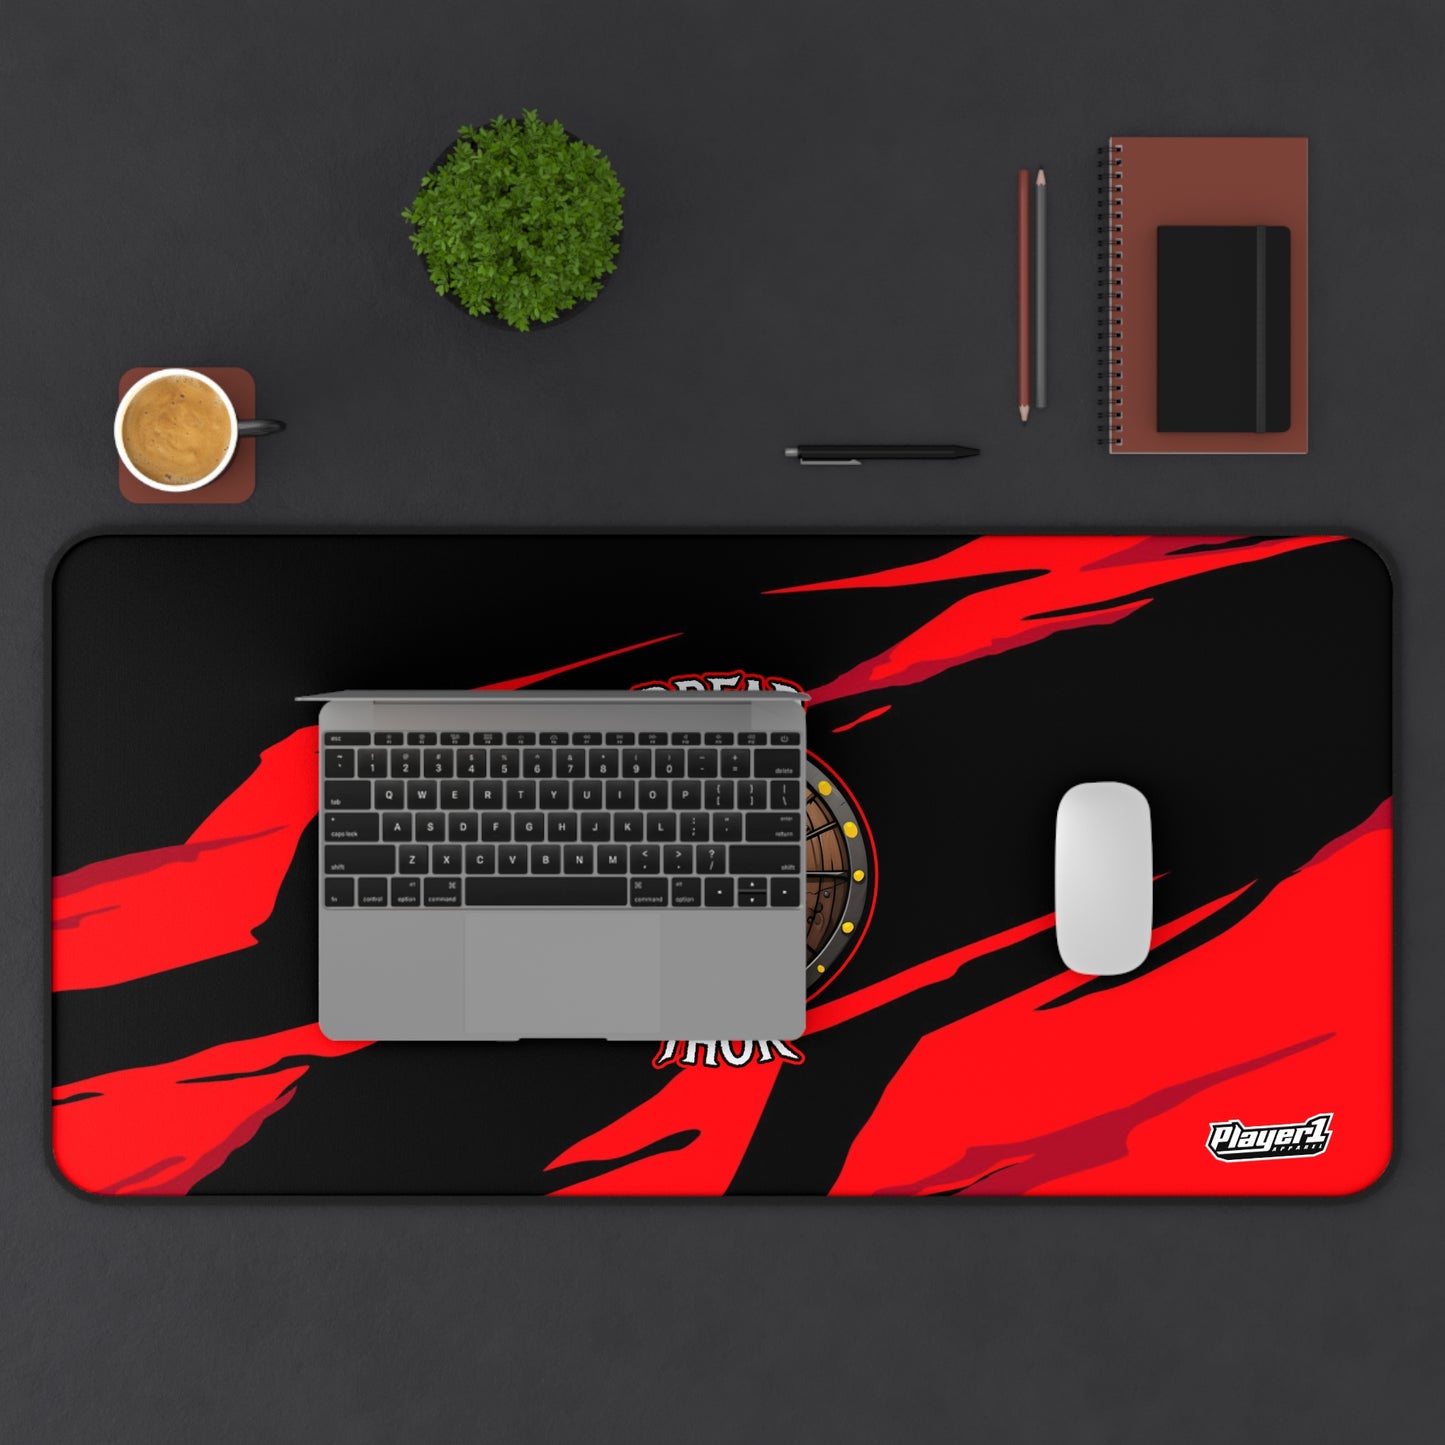 DreadThor Mouse Pad